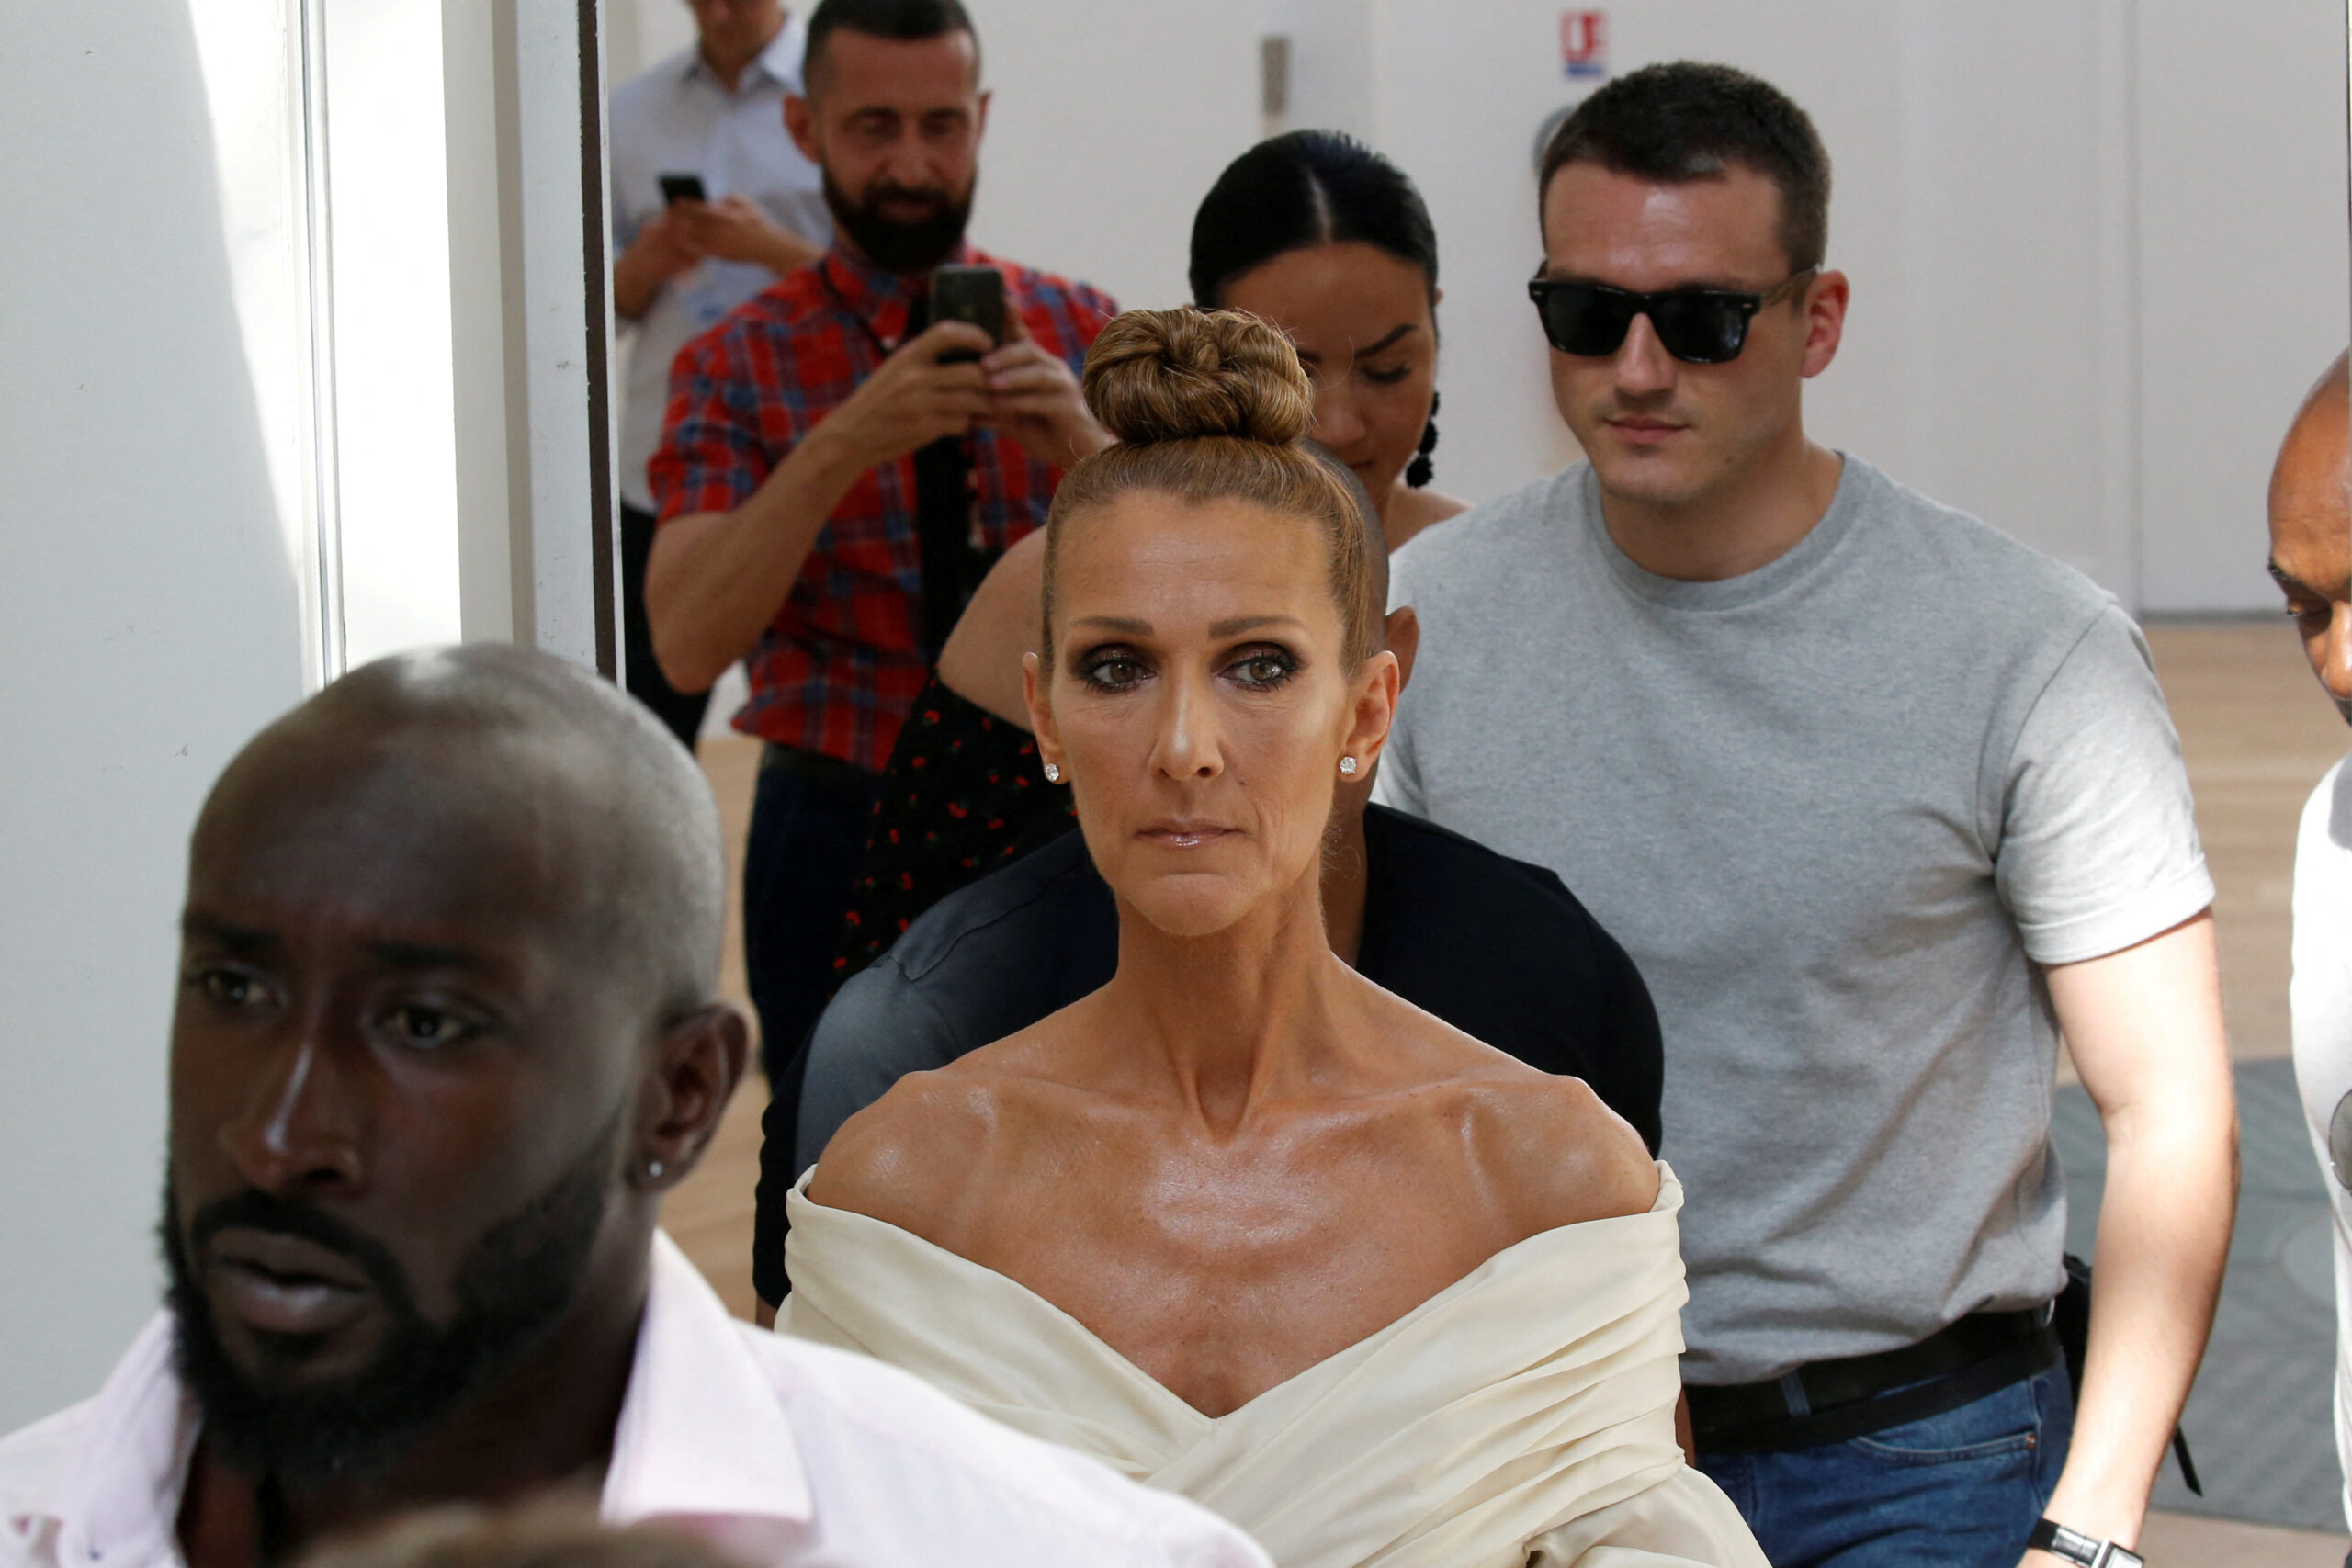 Singer Celine Dion and Pepe Munoz arrive to attend the Haute Couture Fall/Winter 2019/20 collection show by designer Alexandre Vauthier in Paris, France, July 2, 2019. REUTERS/Regis Duvignau